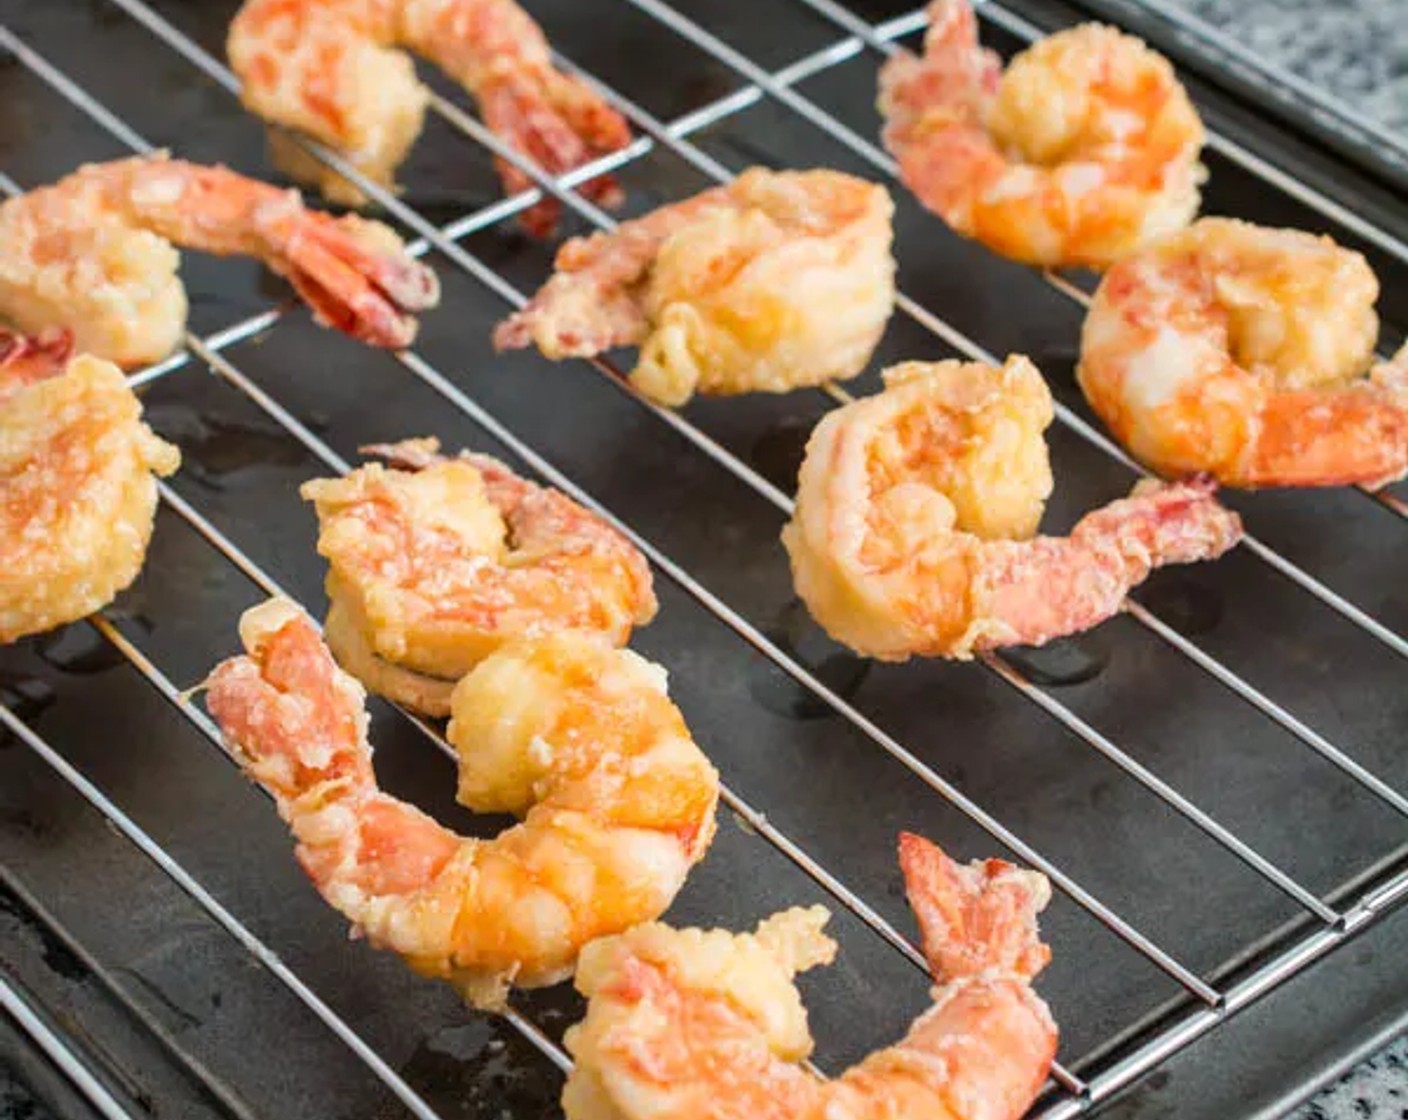 step 8 Place the fried shrimp on a cooling rack over a baking sheet, or on oil-absorbing paper.